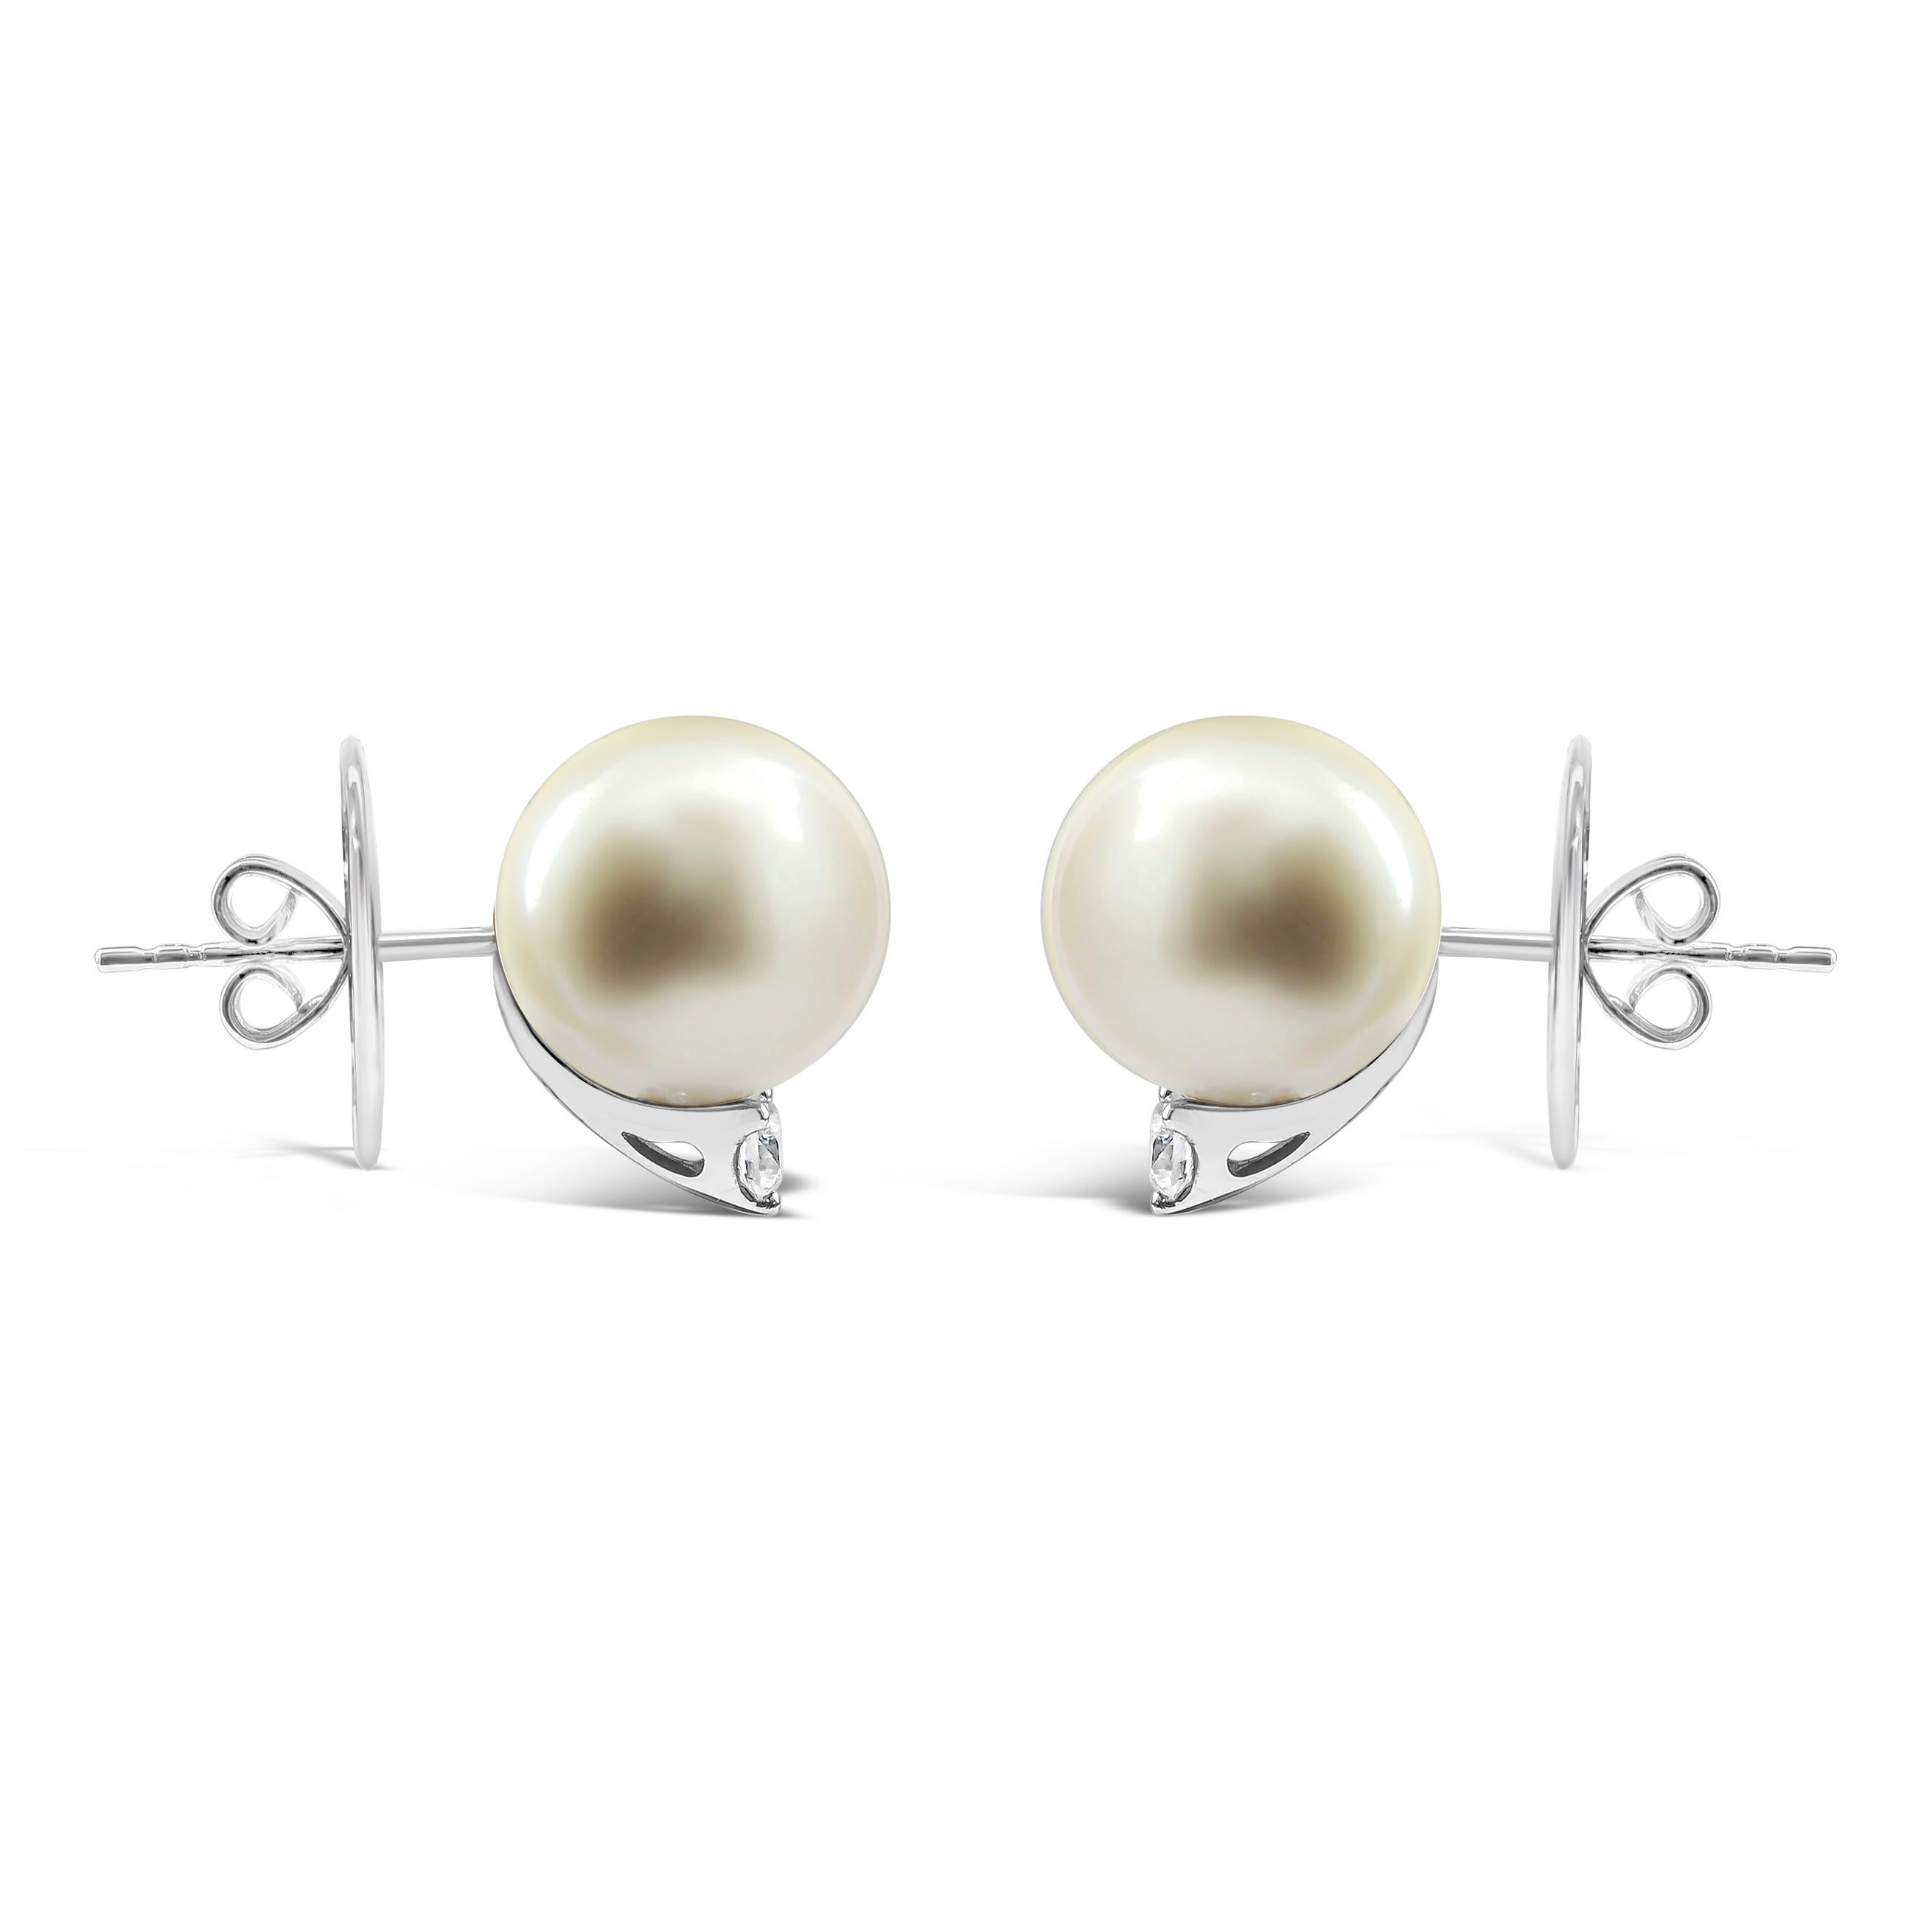 Simple stud earrings showcasing two 11.90 millimeter Tahitian pearls accented by a single round diamond. Diamonds weigh 0.31 carats total. Made in 18 karat white gold.
Style available with matching ring ,necklace and earrings. Please check our